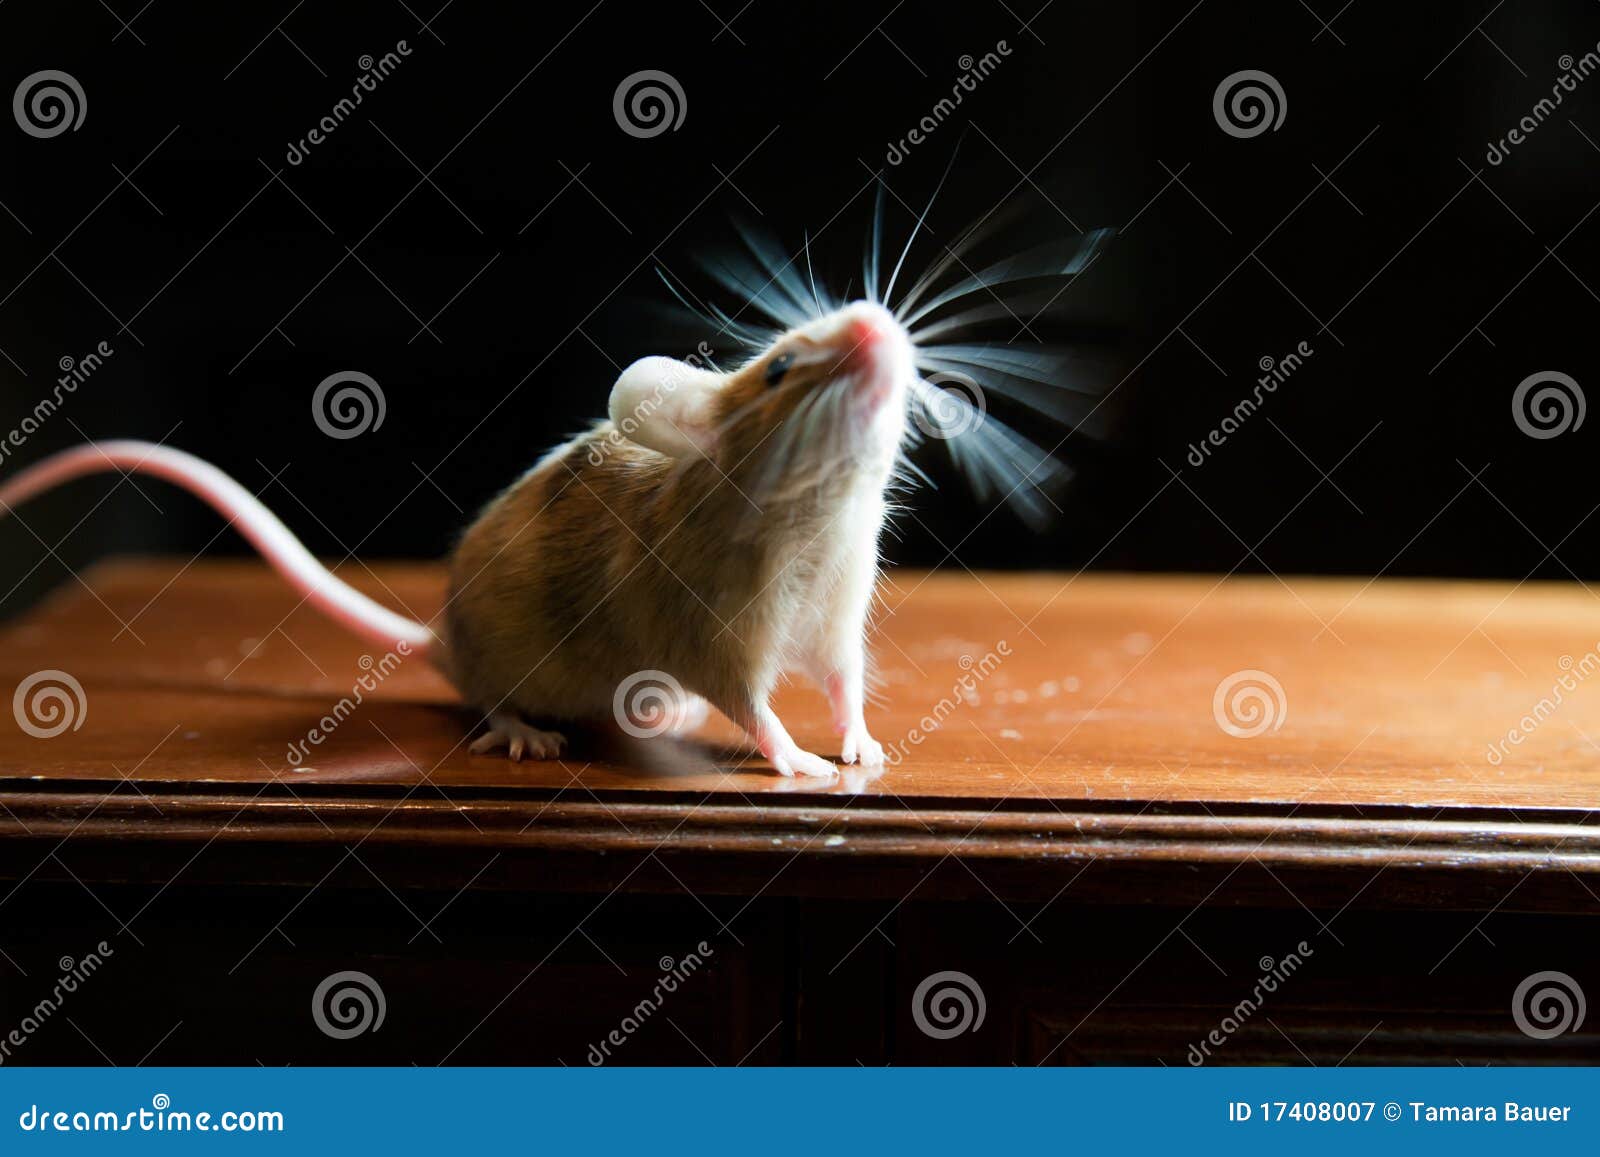 mouse with twitching whiskers